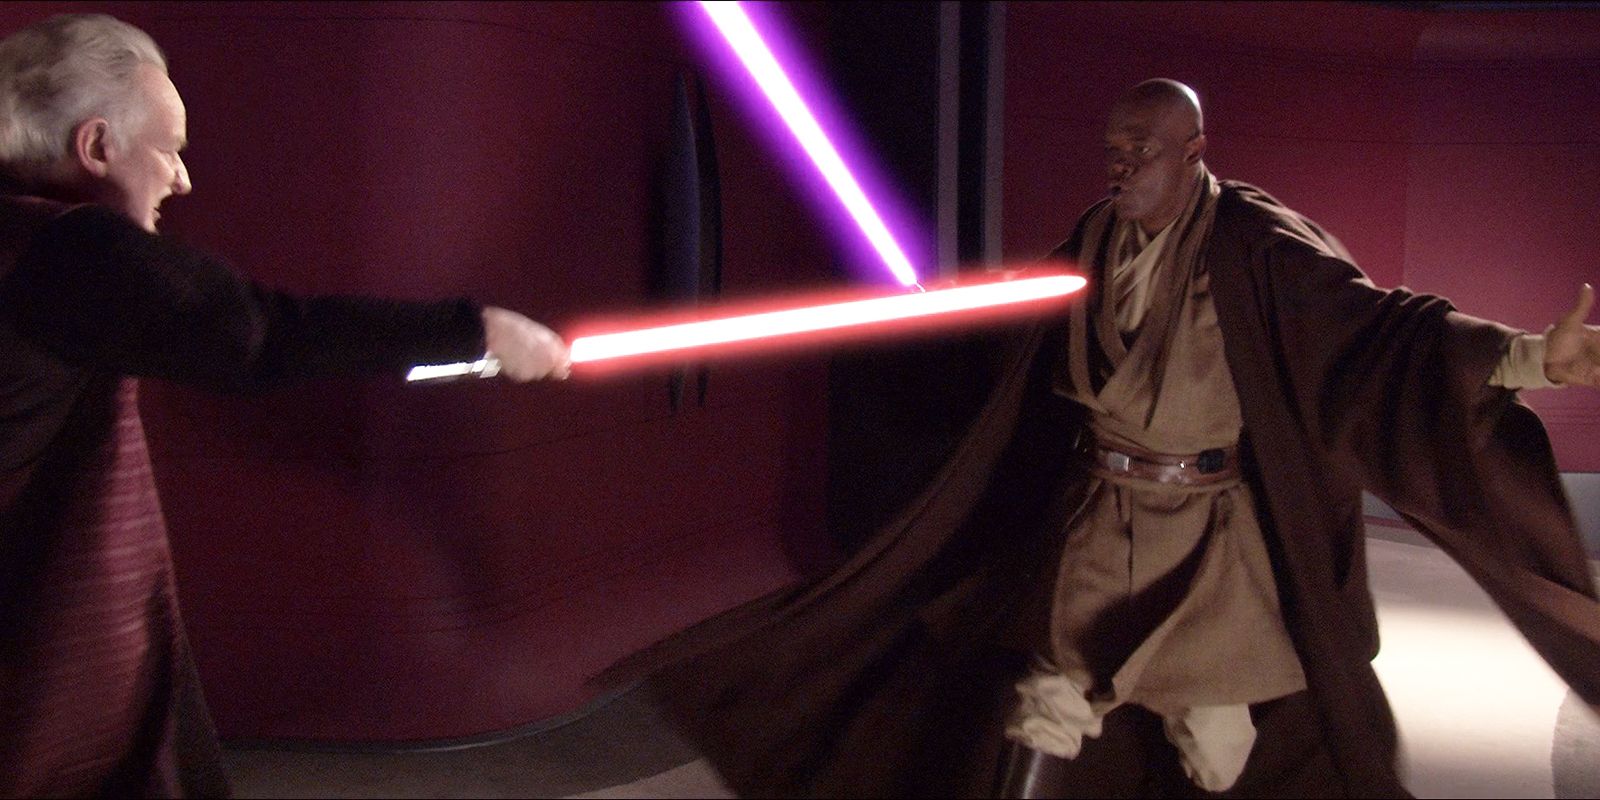 Mace Windu engages Chancellor Palpatine in a lightsaber duel in Revenge of the Sith